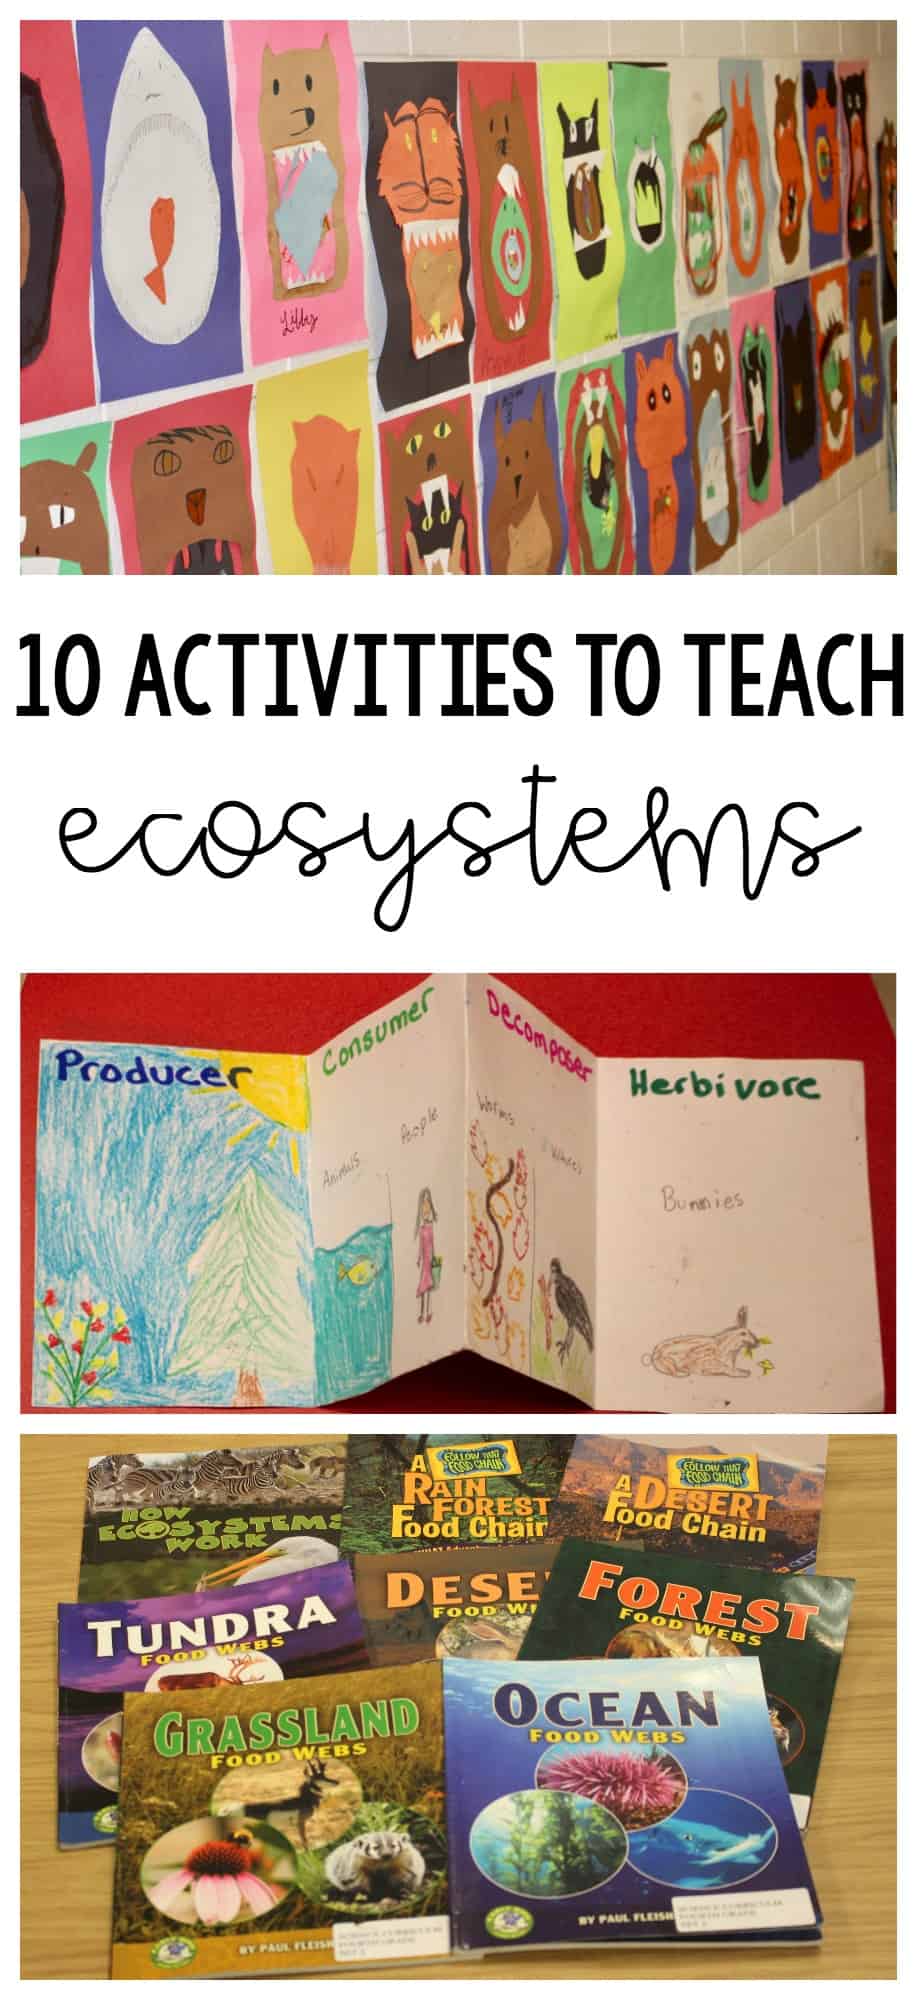 Here are 10 engaging ways to teach ecosystems! My third and fourth graders loved these activities!